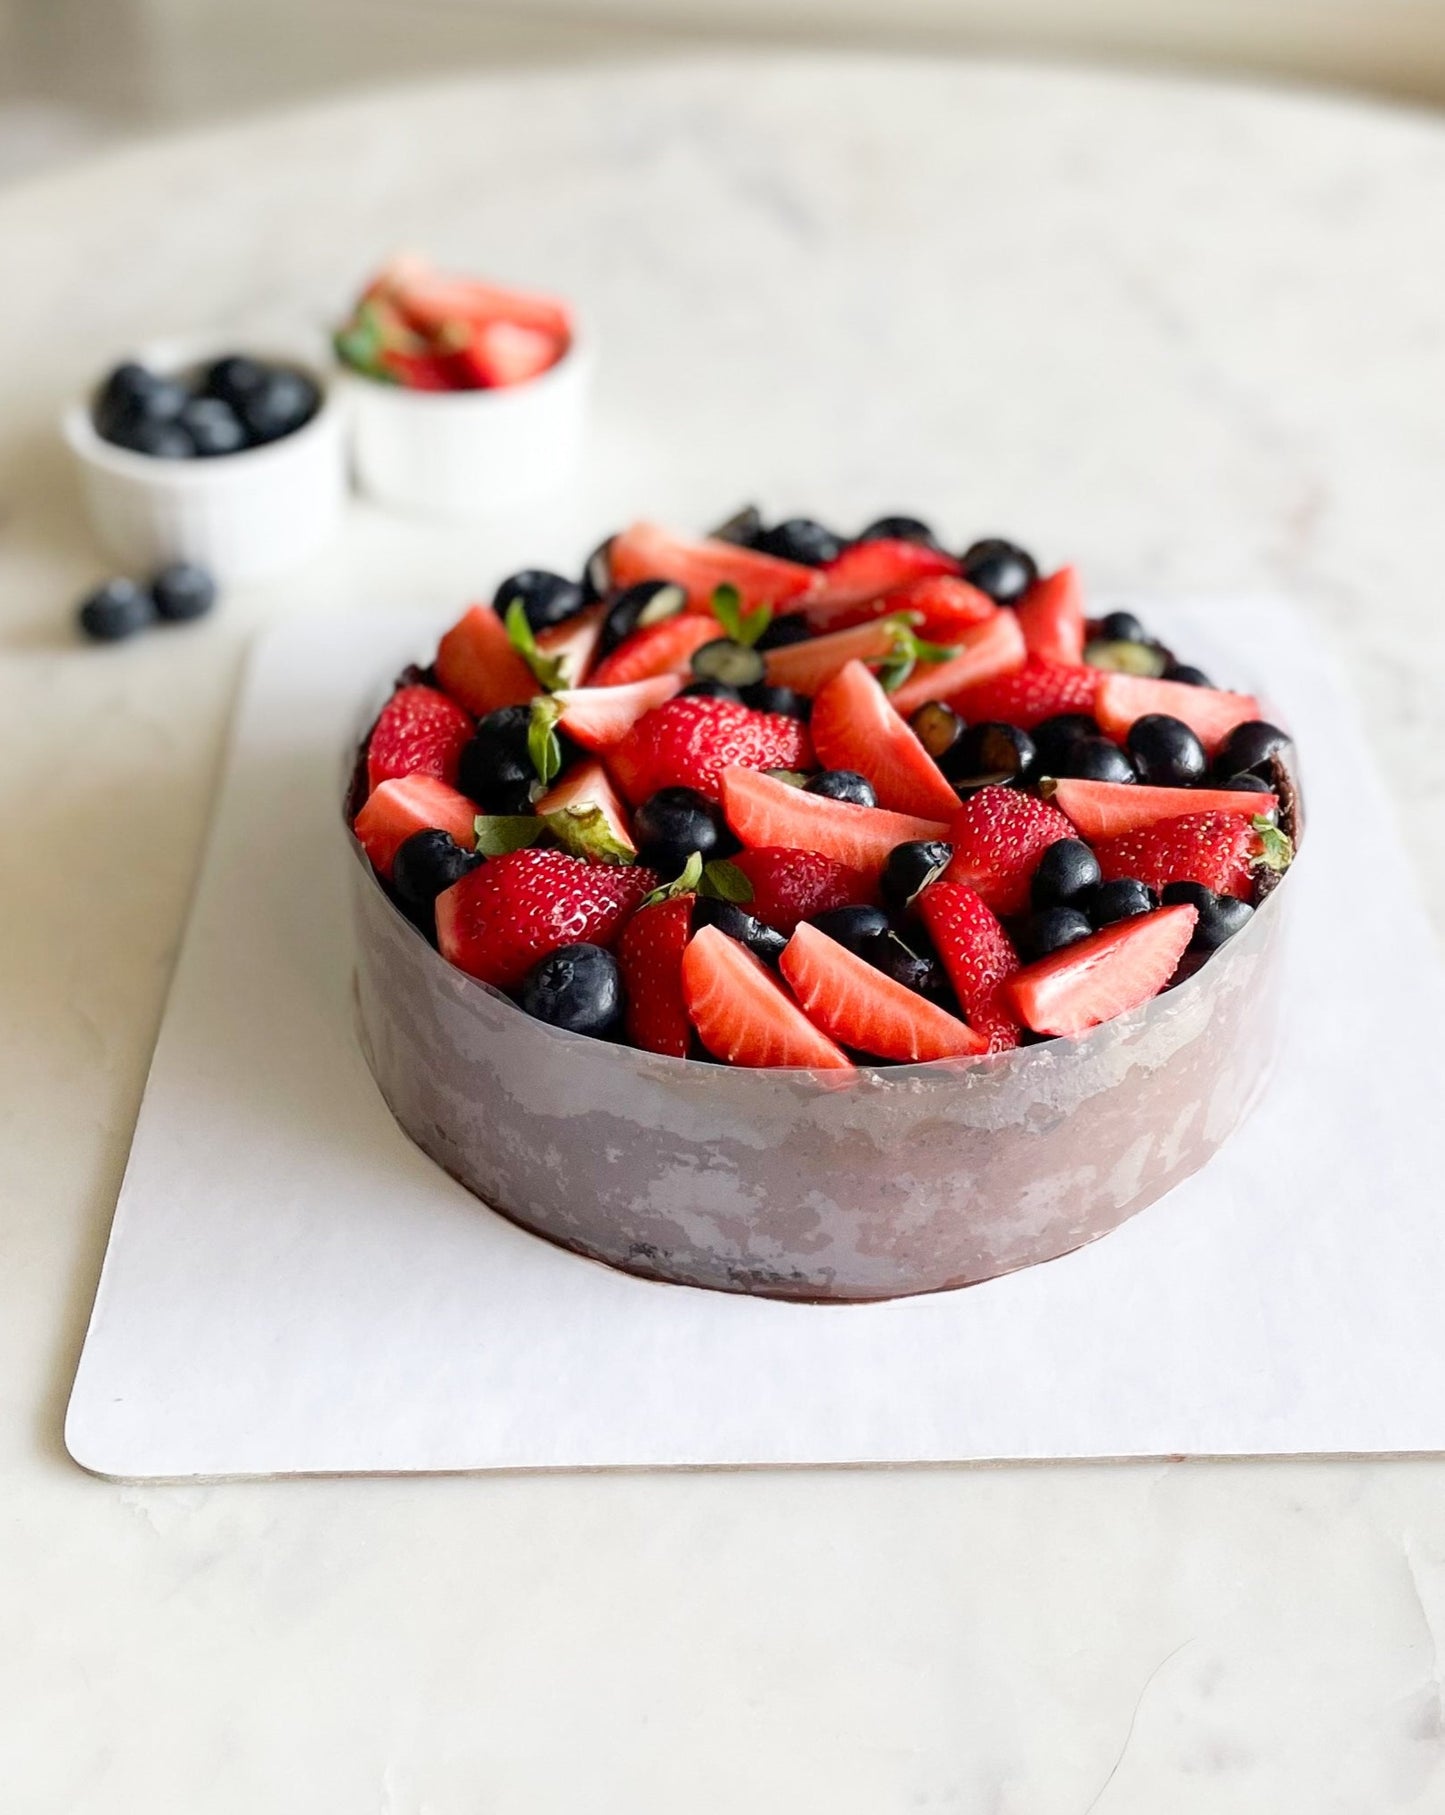 CHOCOLATE CAKE TOPPED WITH BERRIES